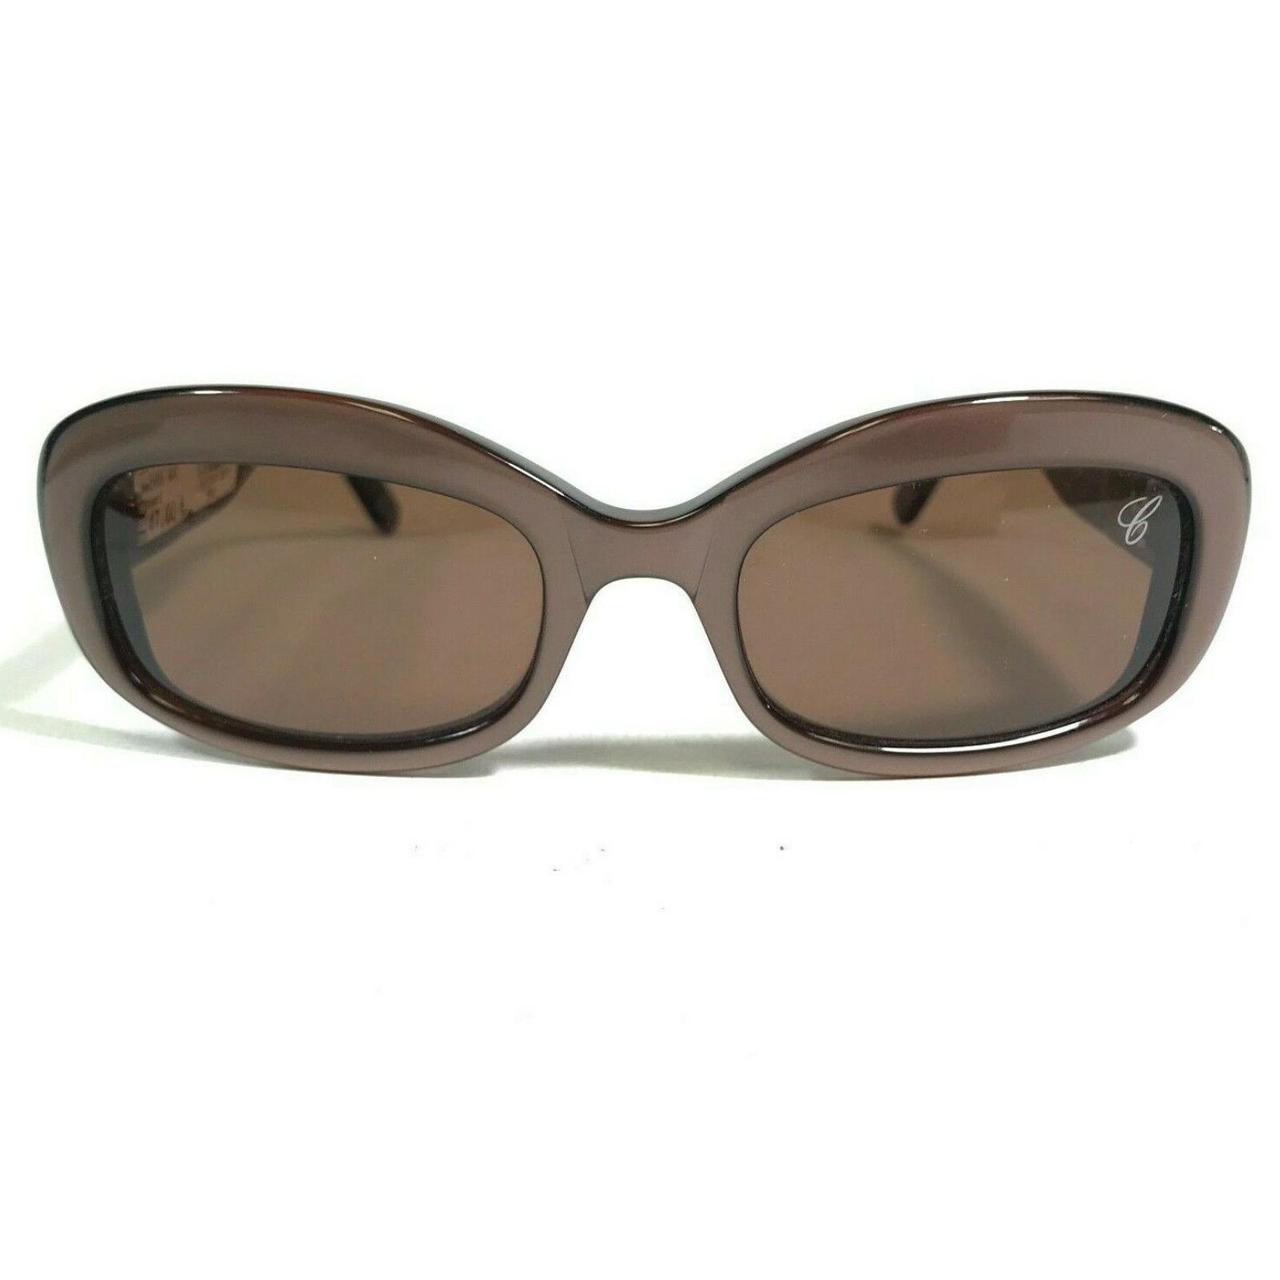 Product Image 1 - Chopard Sunglasses CH535 6062 Brown